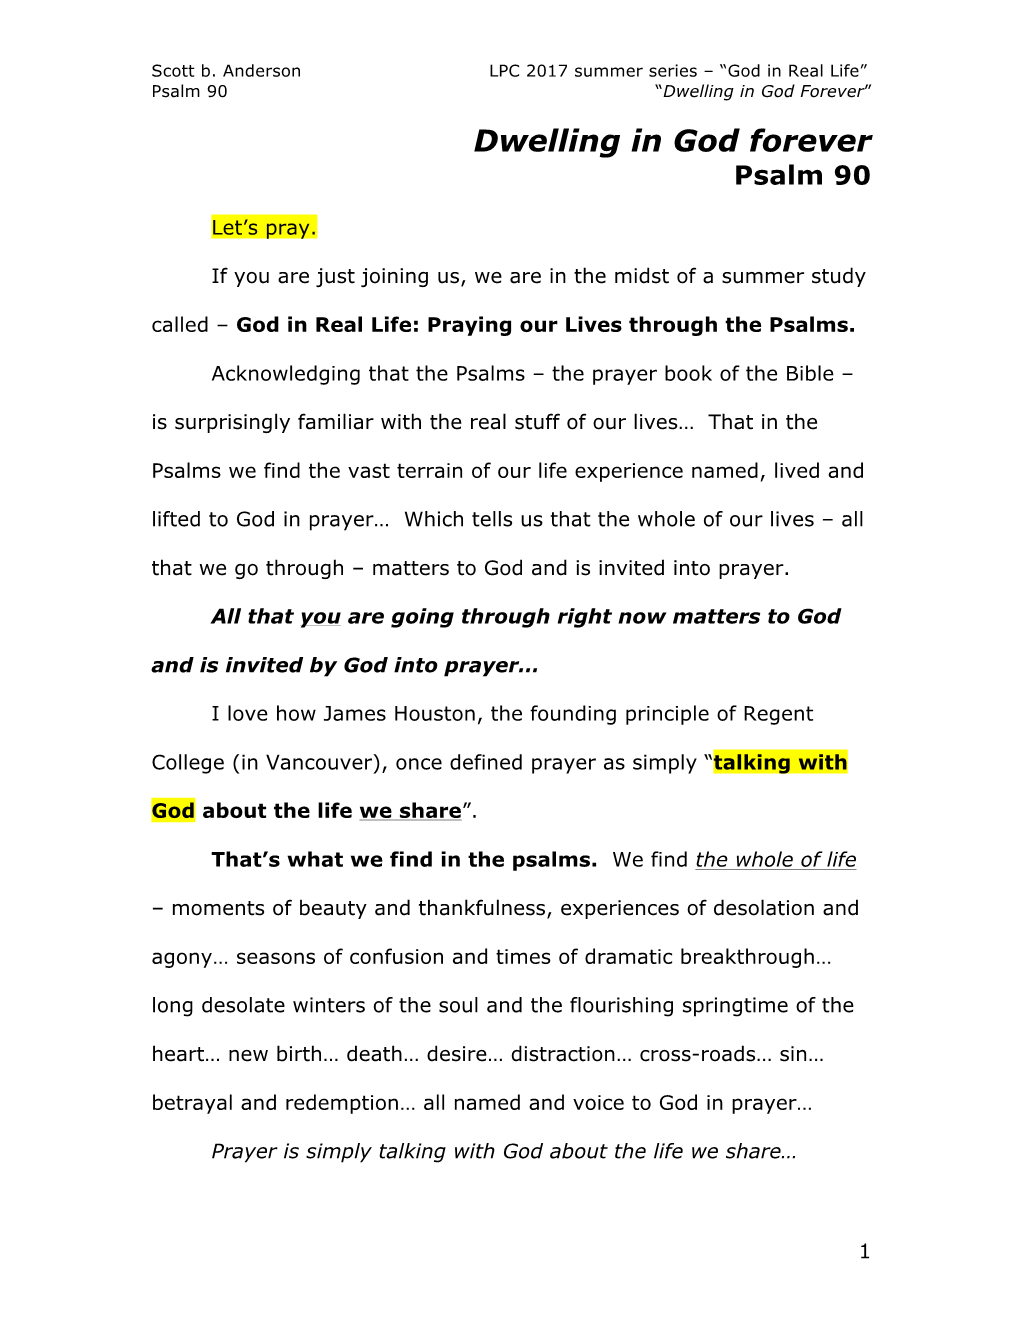 Psalm 90 “Dwelling in God Forever” Dwelling in God Forever Psalm 90